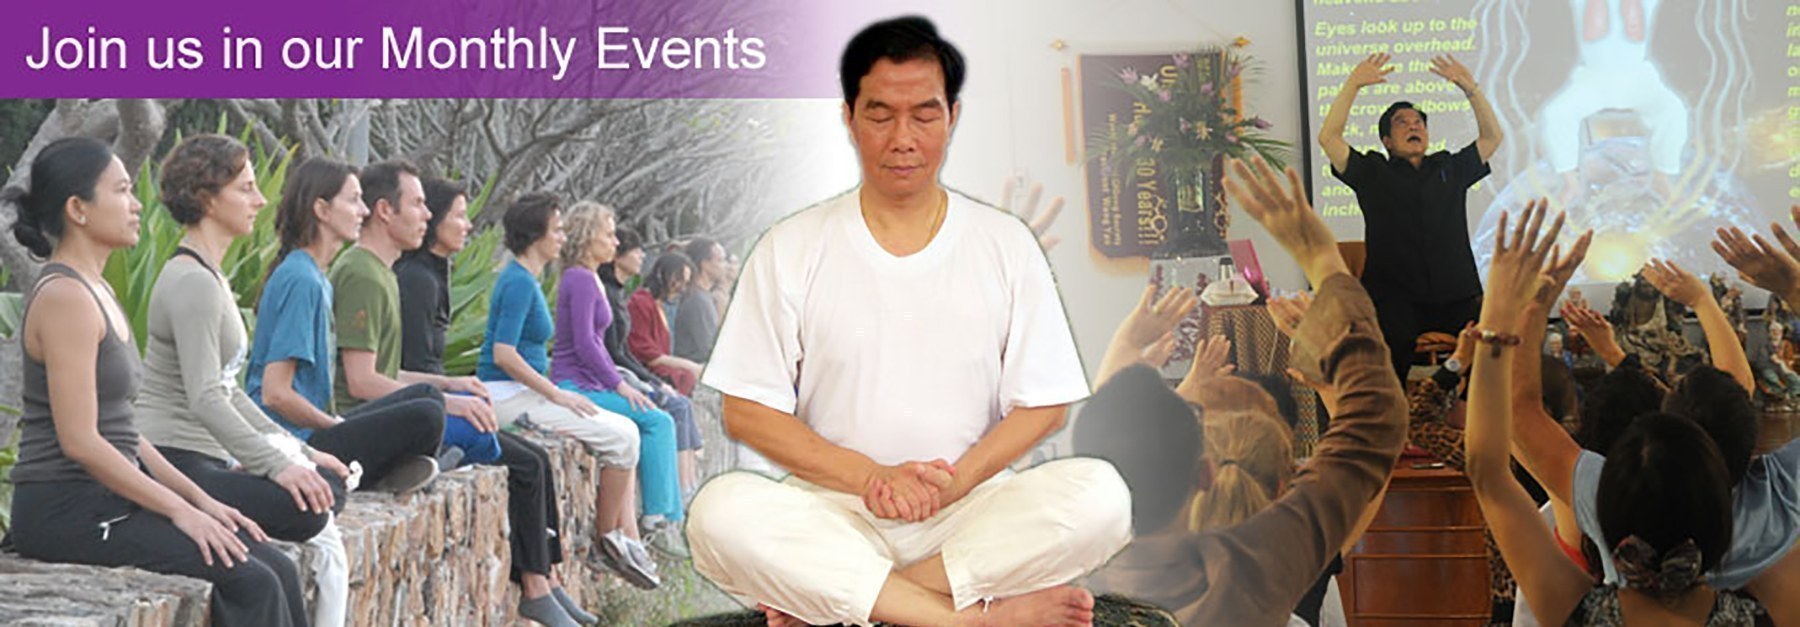 Healing Workshop Tao Garden Thailand – Join us in our Monthly Events